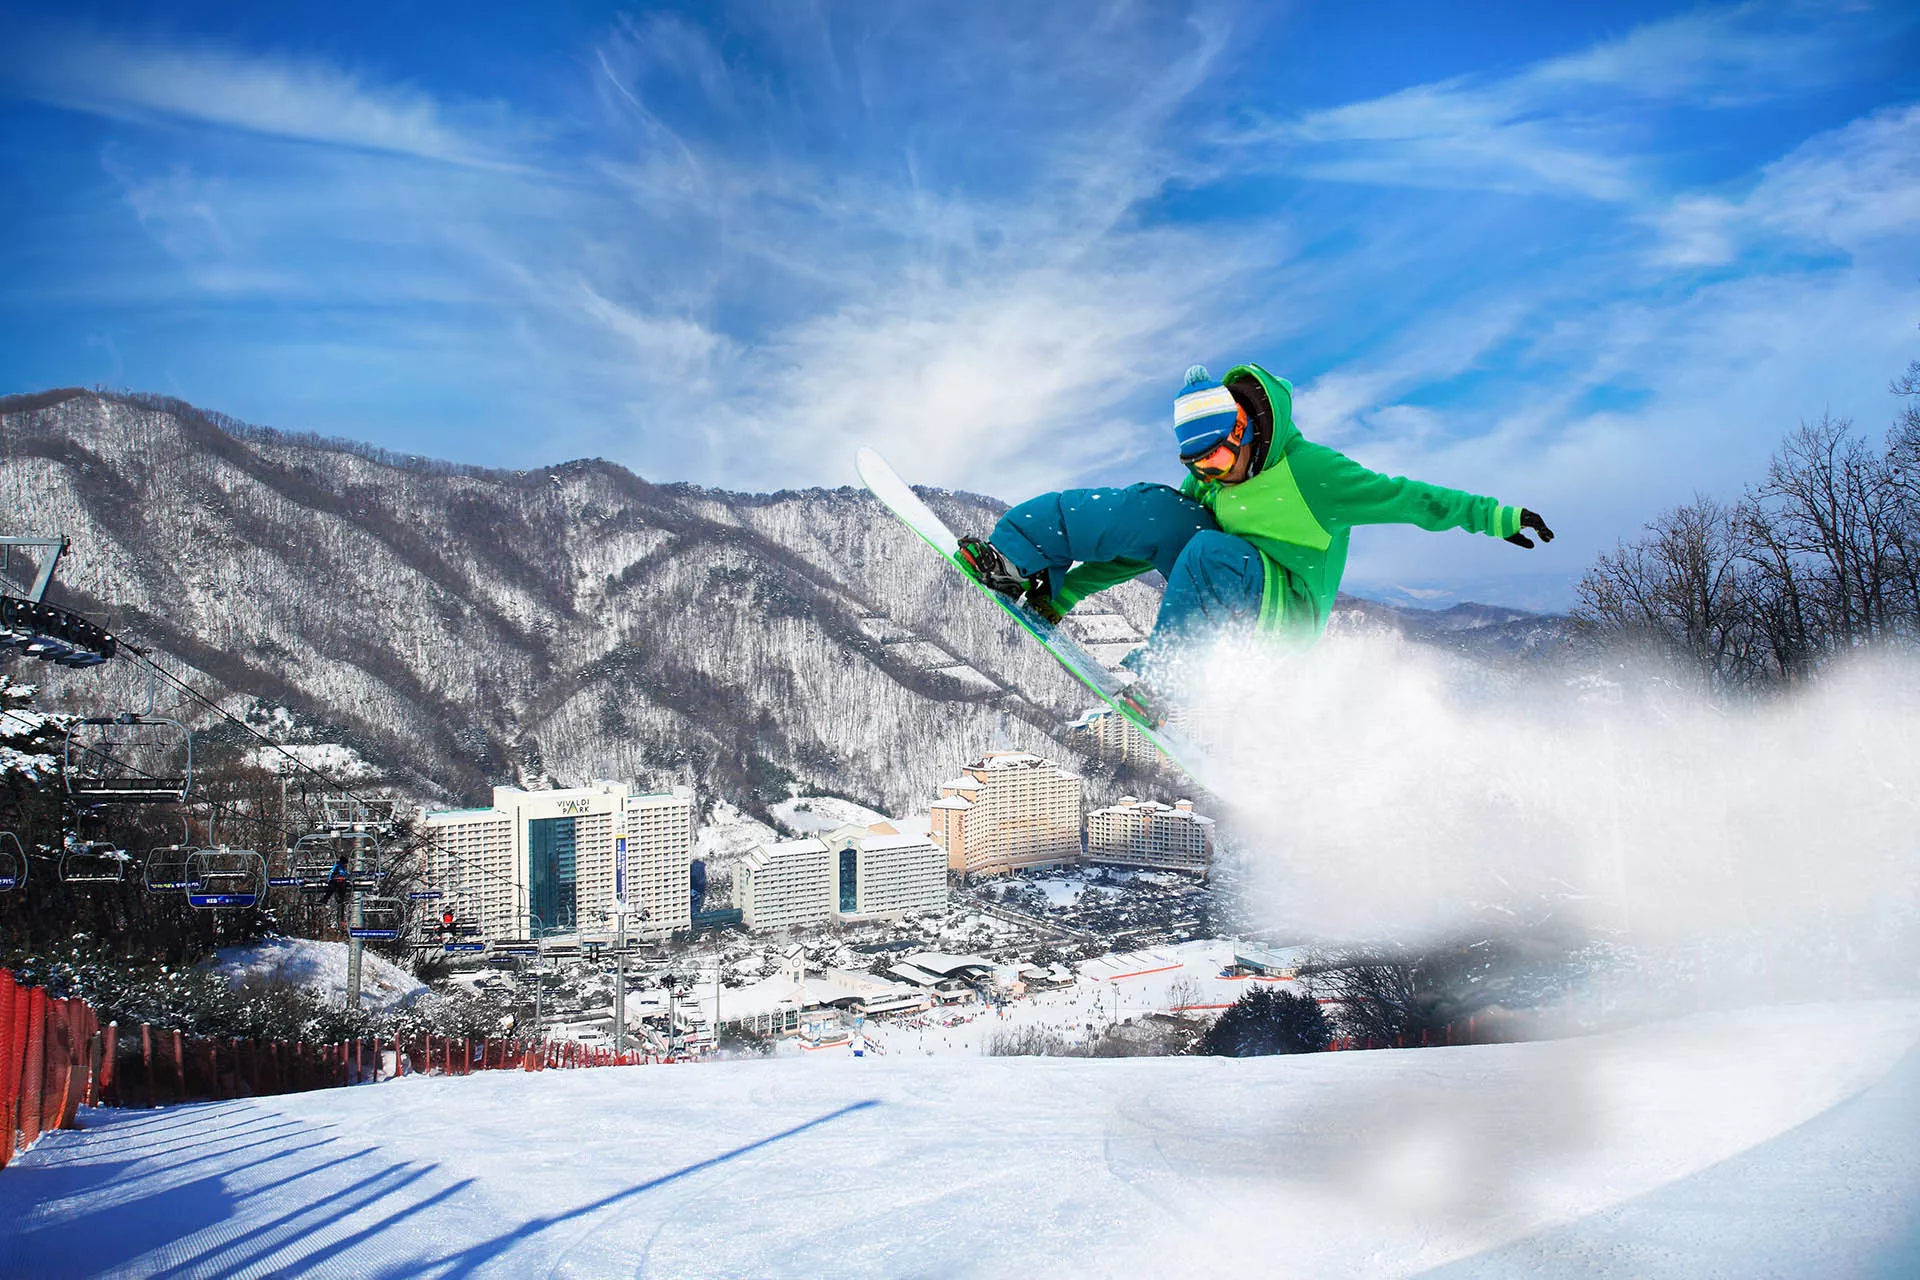 Vivaldi Park’s in South Korea, East Asia | Snowboarding,Skiing,Snowmobiling - Rated 6.1